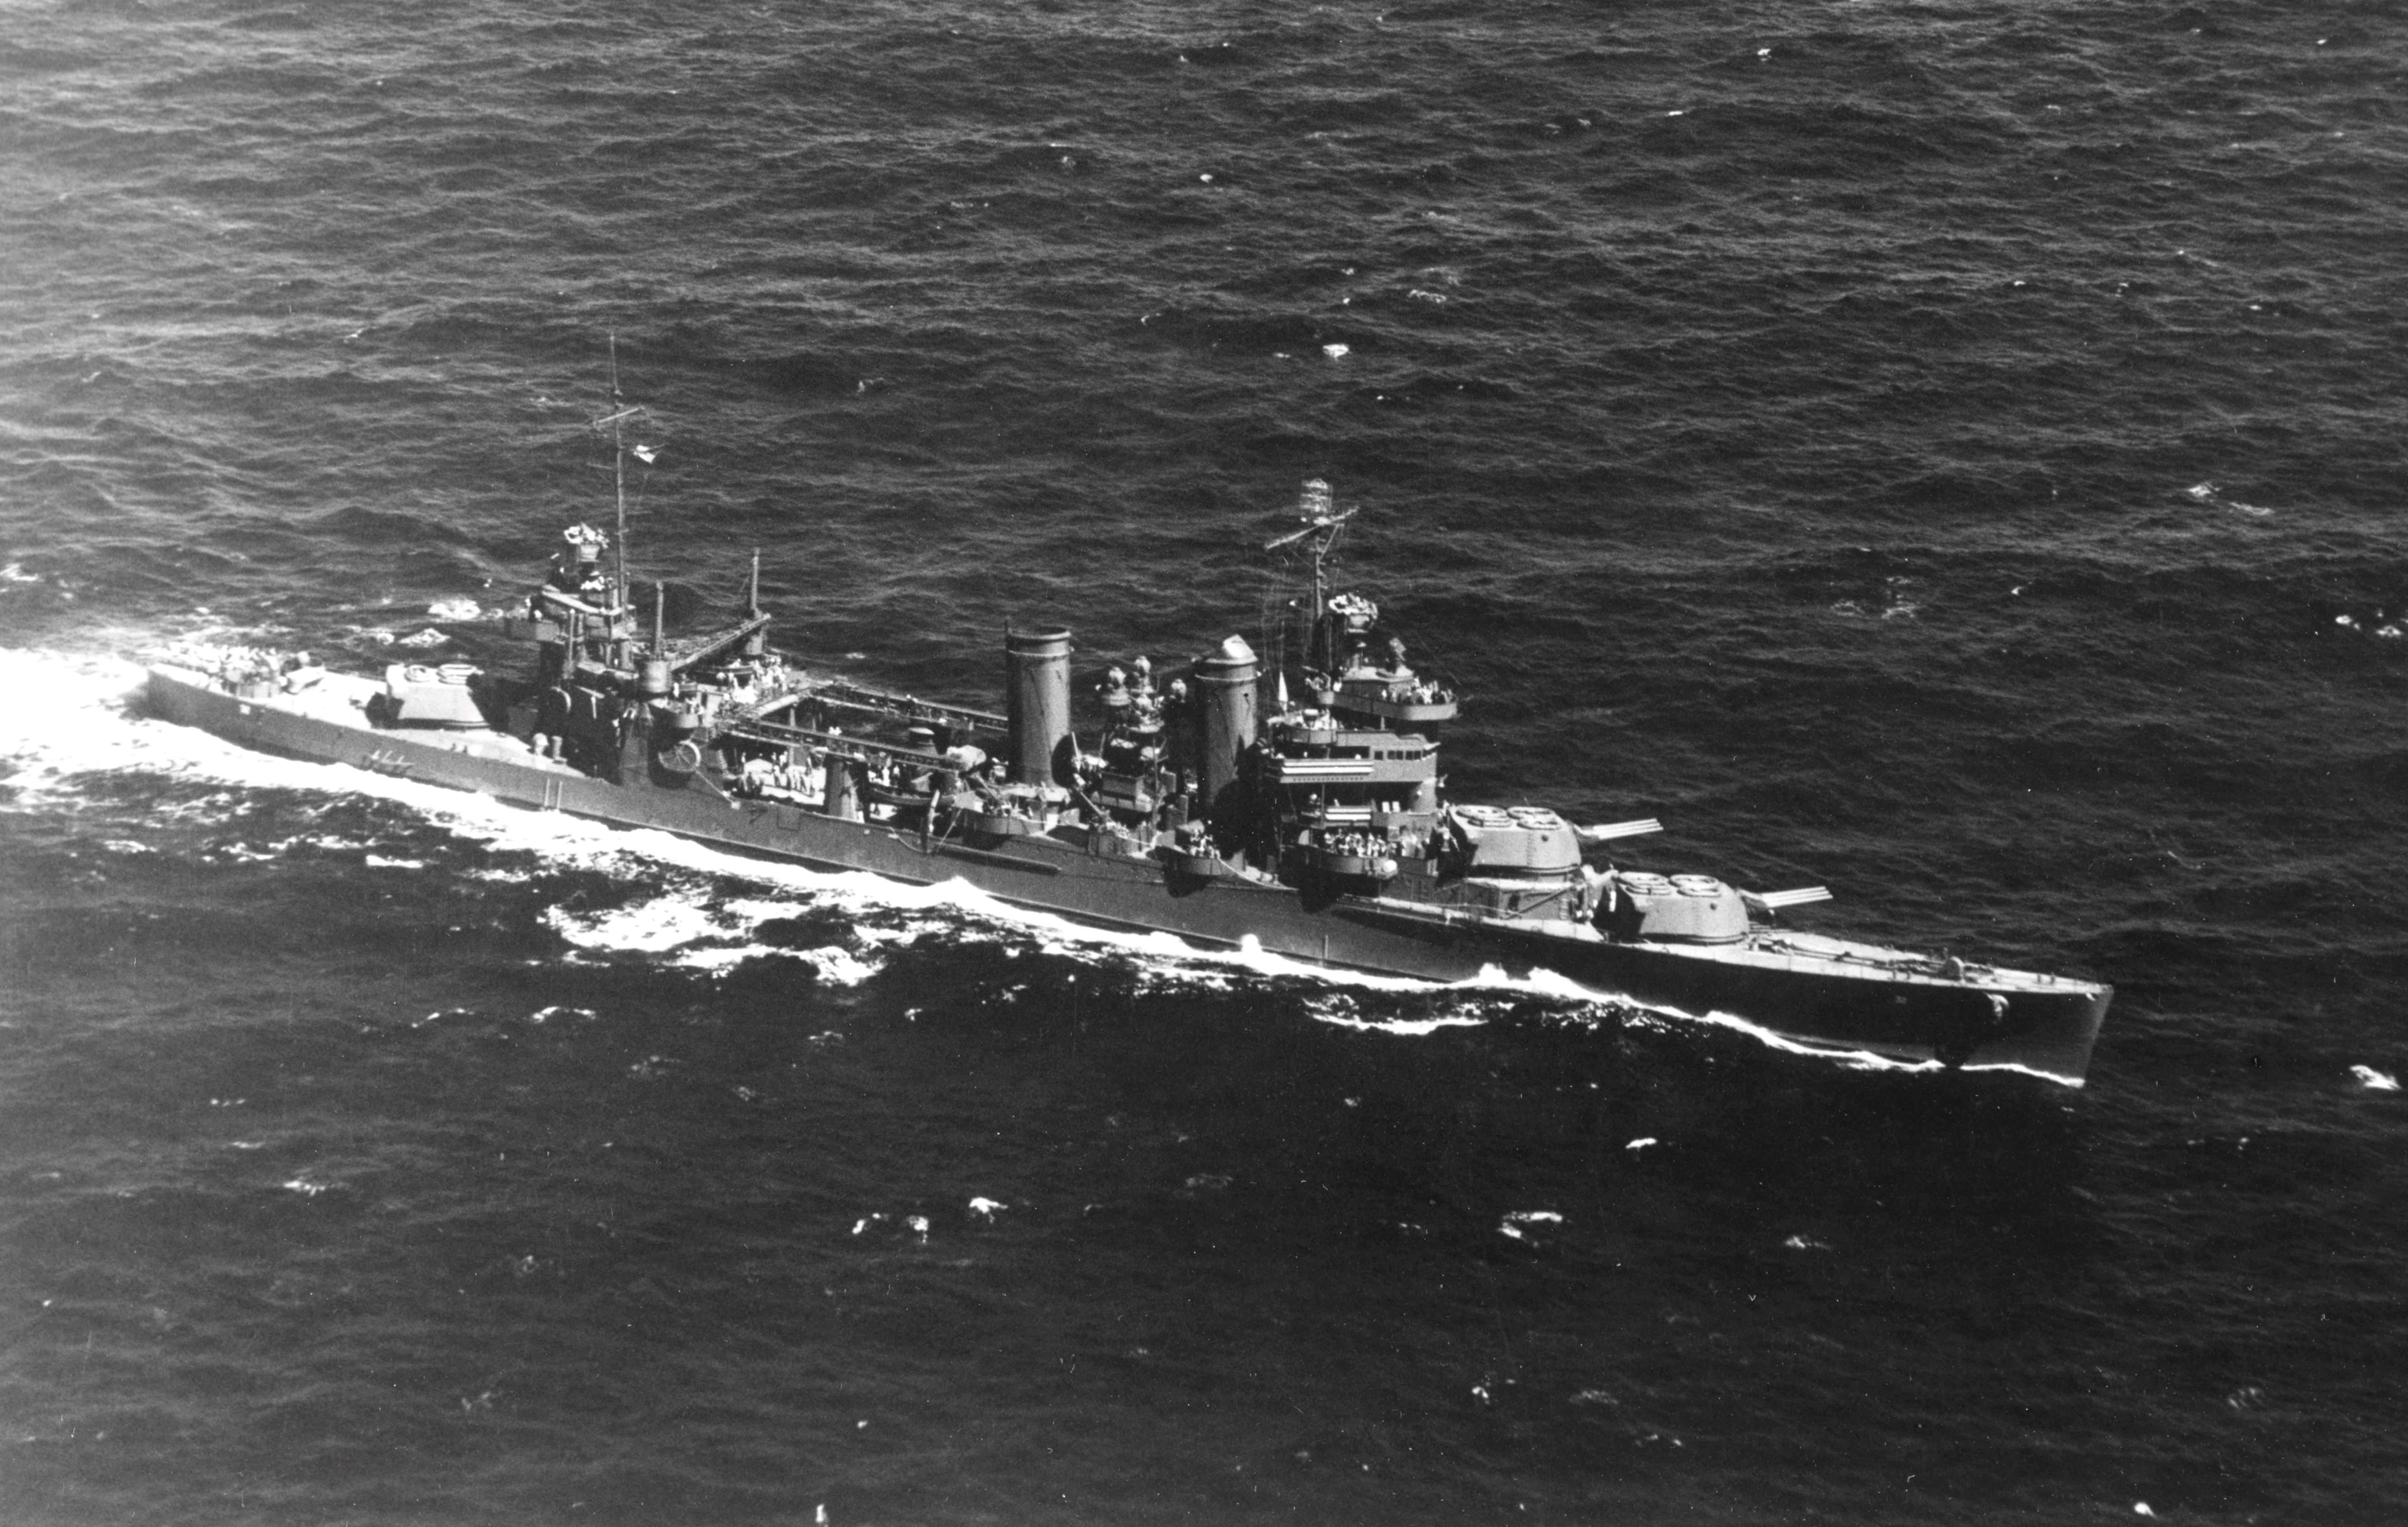 Aerial view of USS New Orleans during exercises in Hawaiian waters, 8 Jul 1942. Note all main guns trained to port.